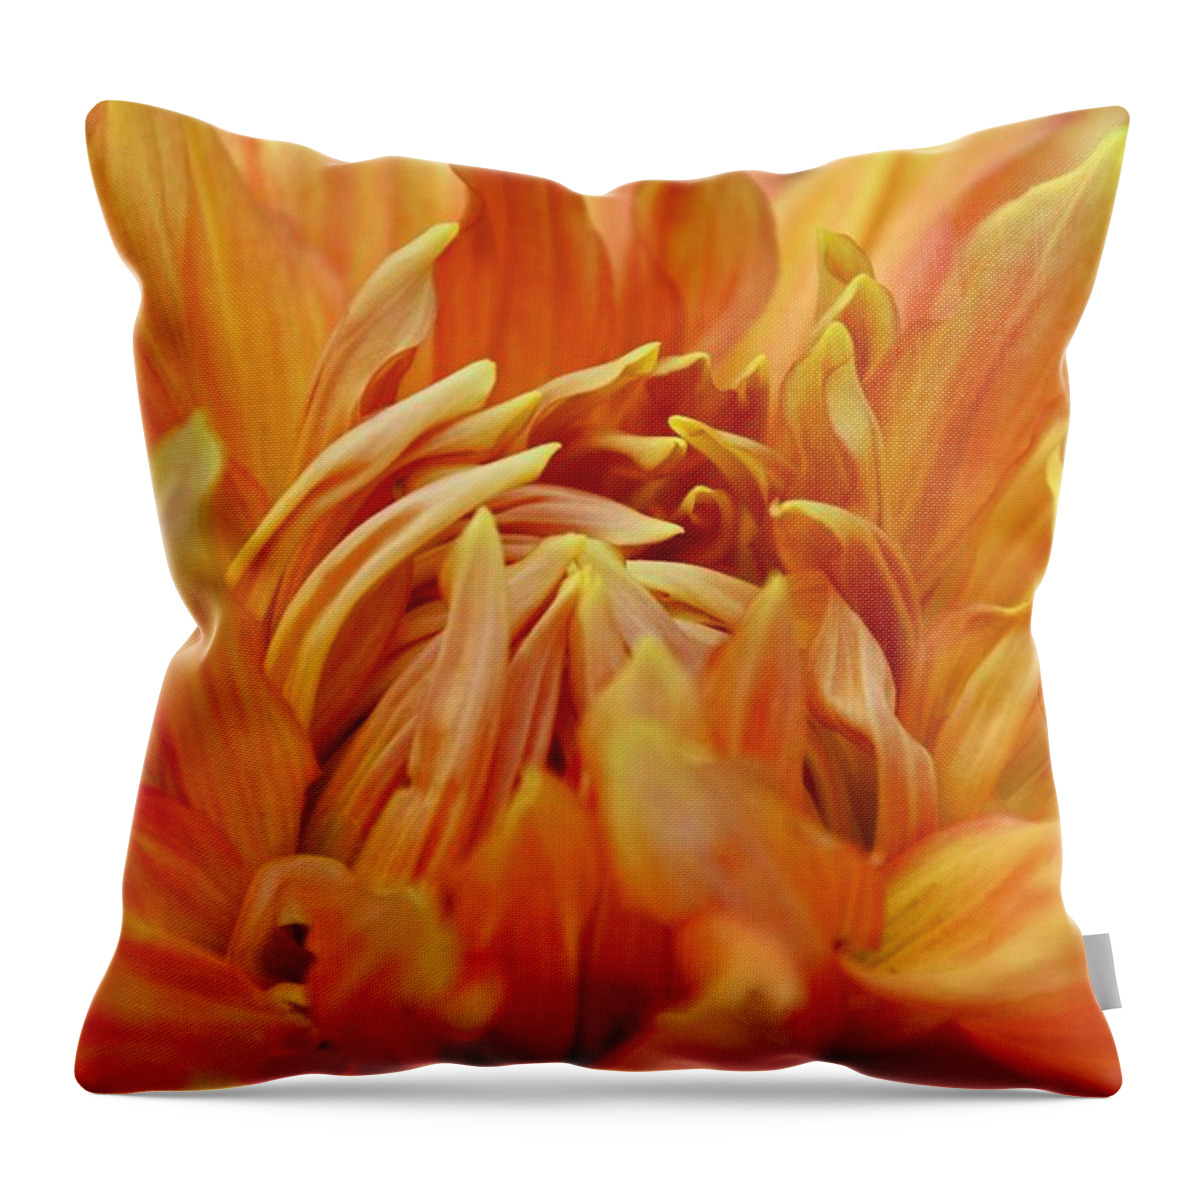 Dahlia Throw Pillow featuring the photograph Summer Tales by Michiale Schneider